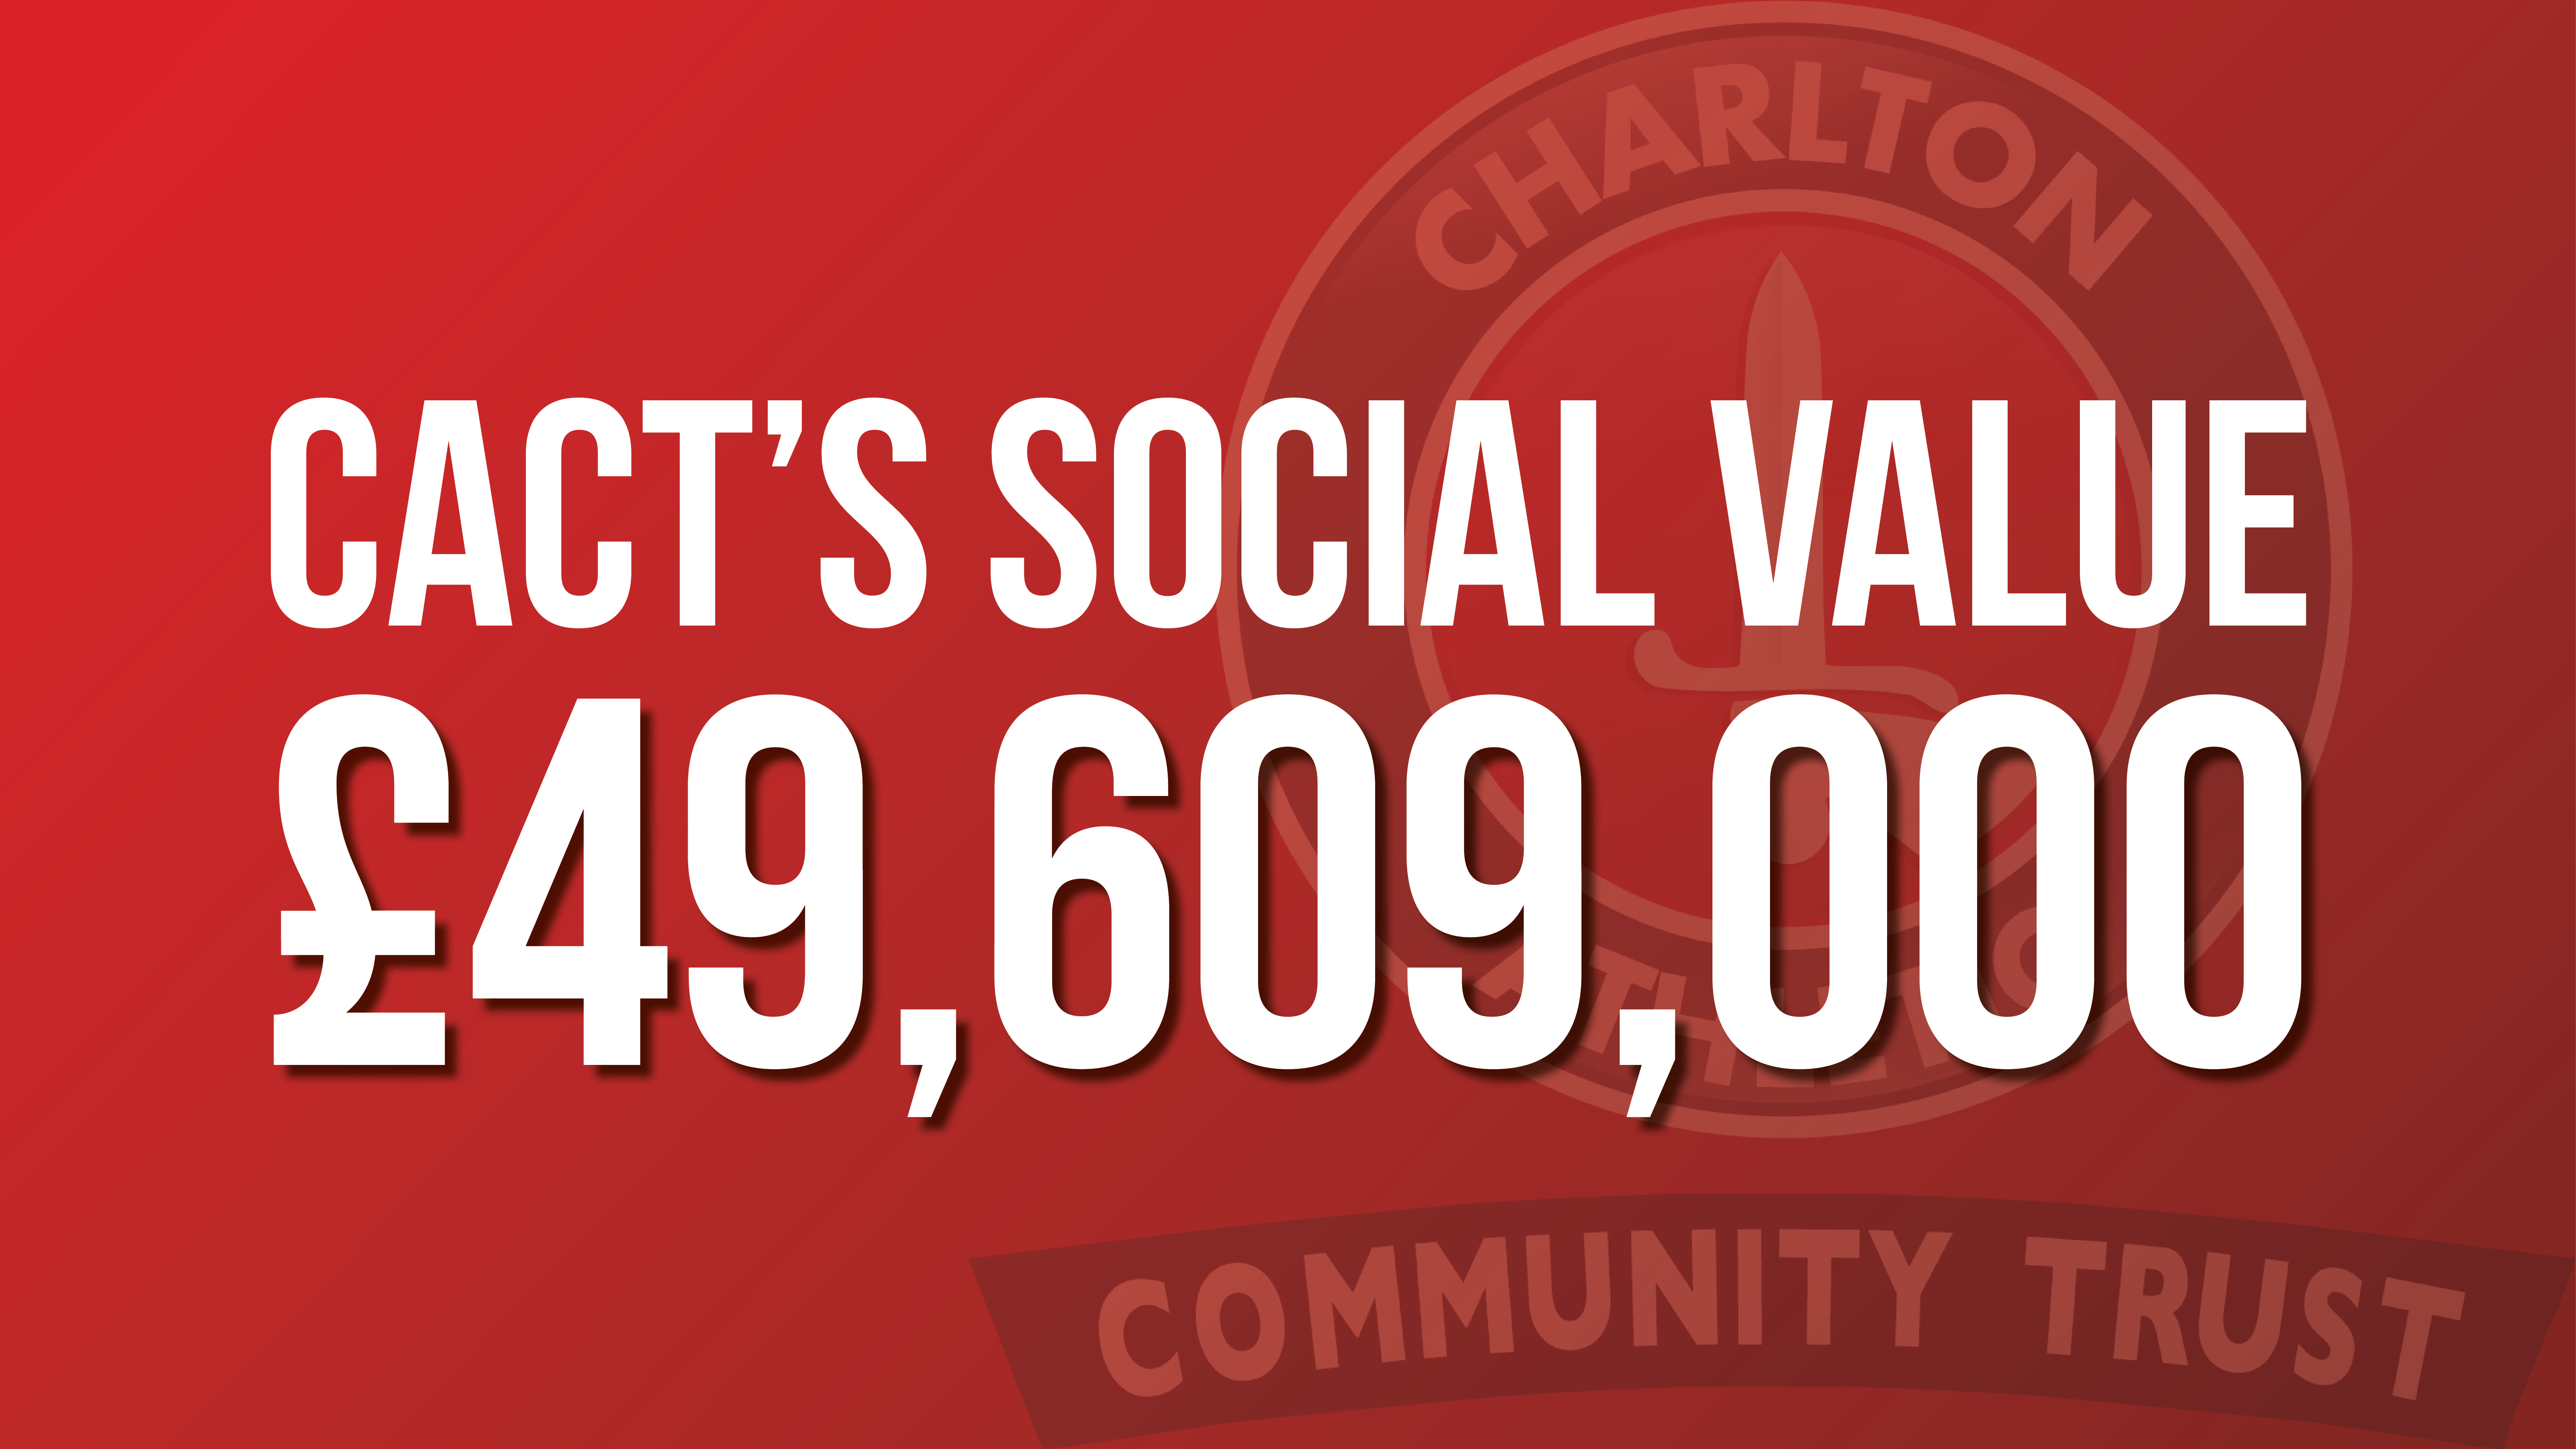 Graphic reading 'CACT's social value £49,609,000'